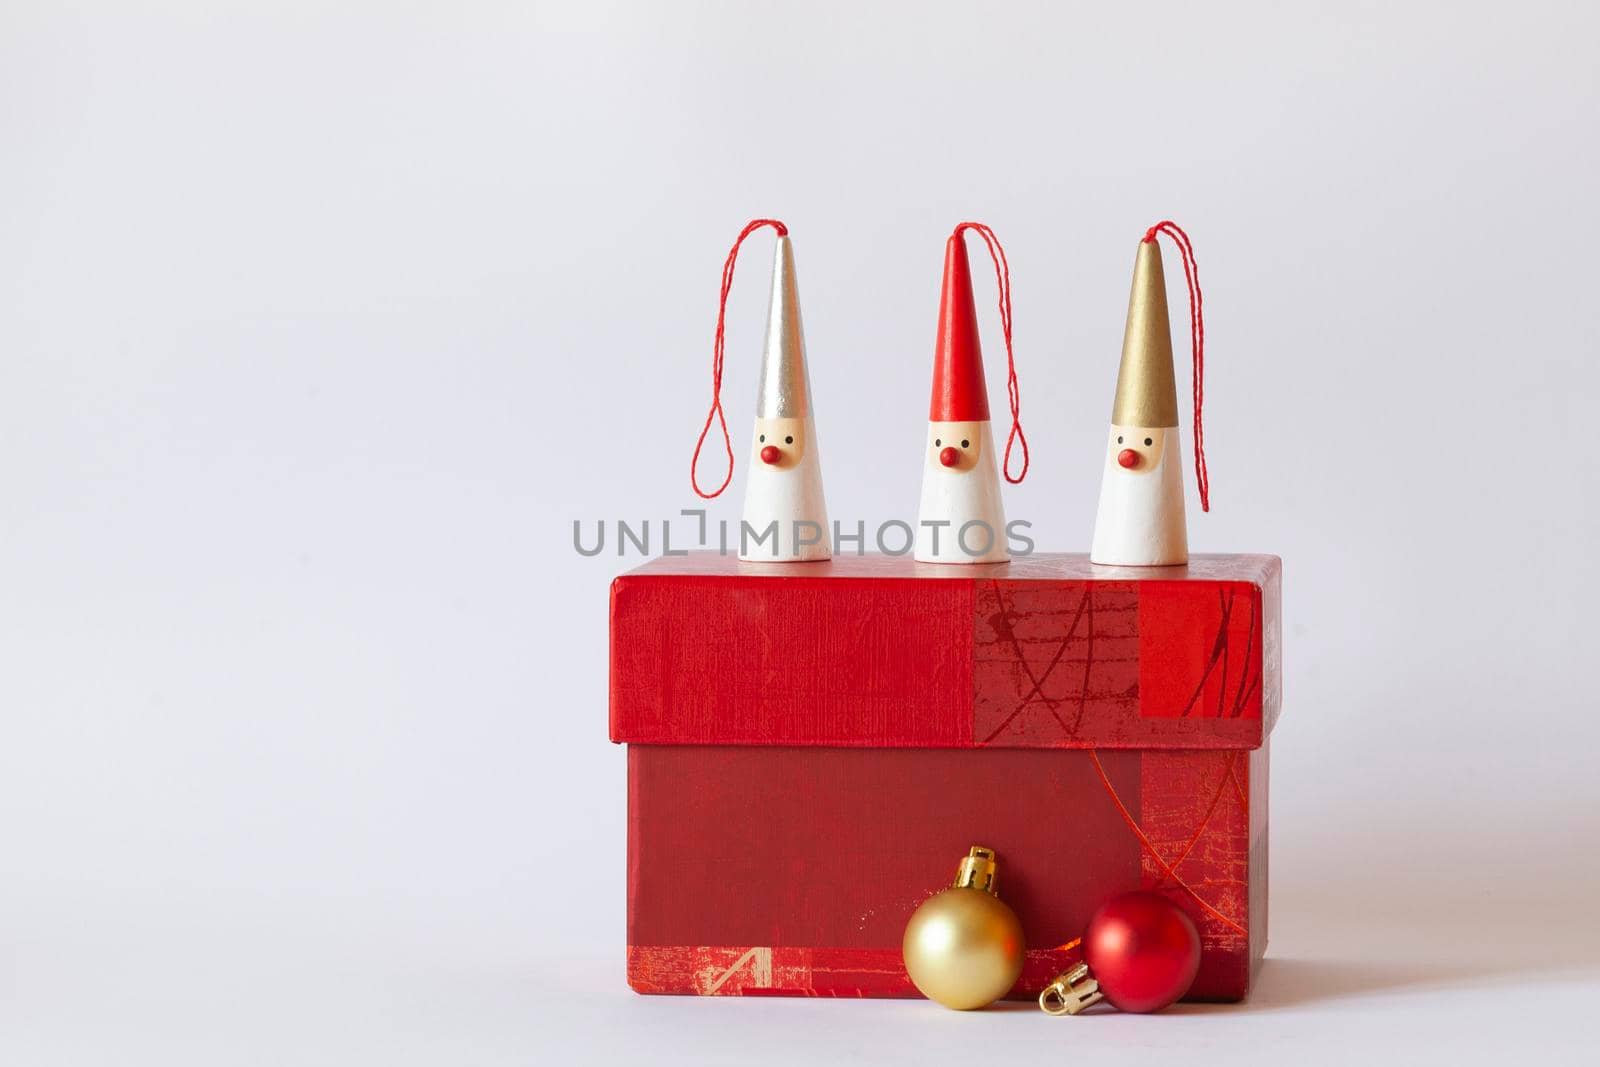 three Santa Clauses figurines on a red gift box, decorative new year tree balls, white background, side view, copy space